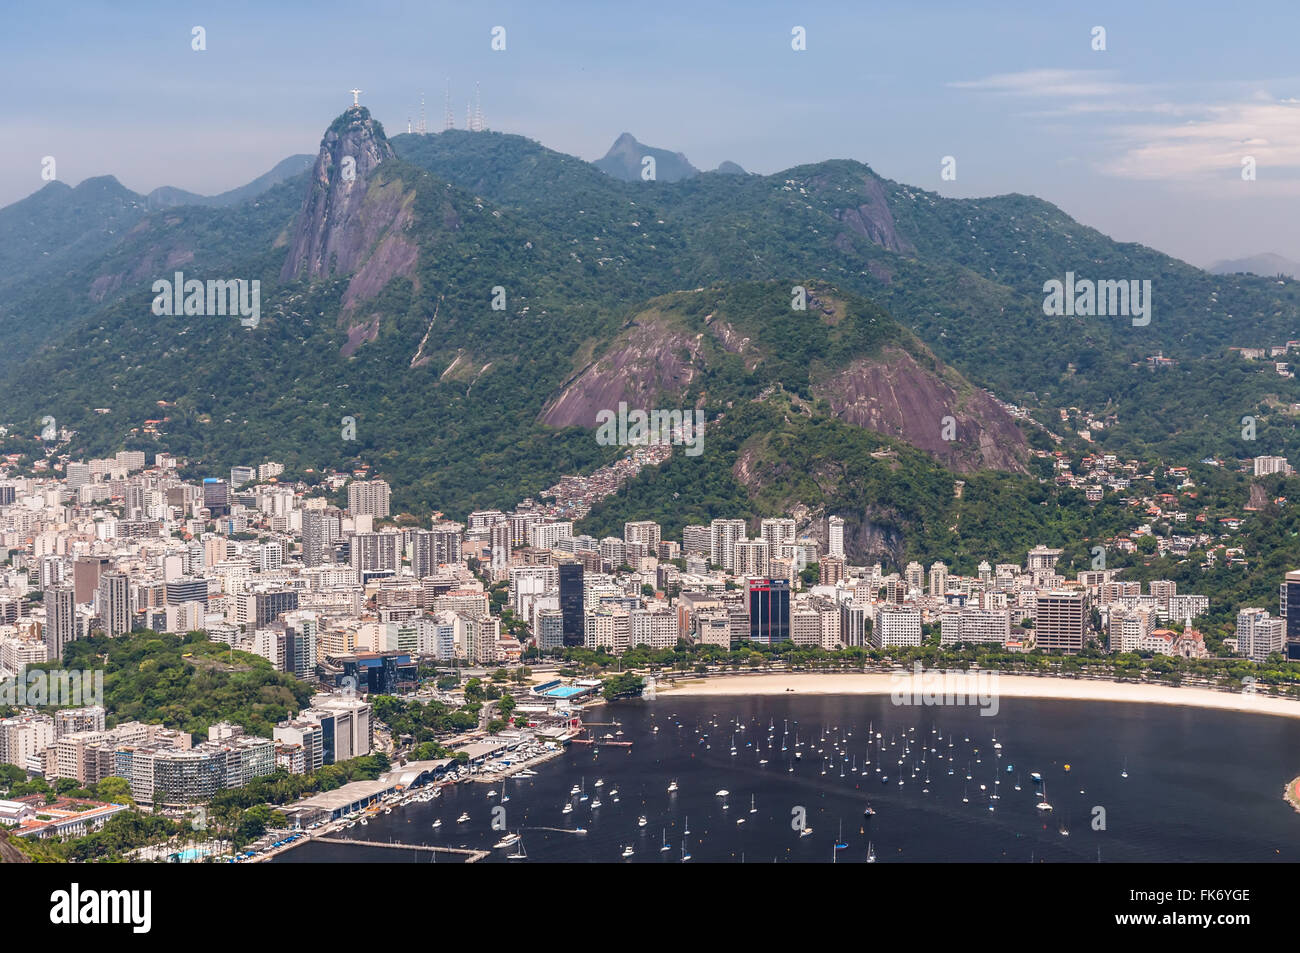 Aerial view of Rio de Janeiro from the Sugarloaf Mountain. Stock Photo